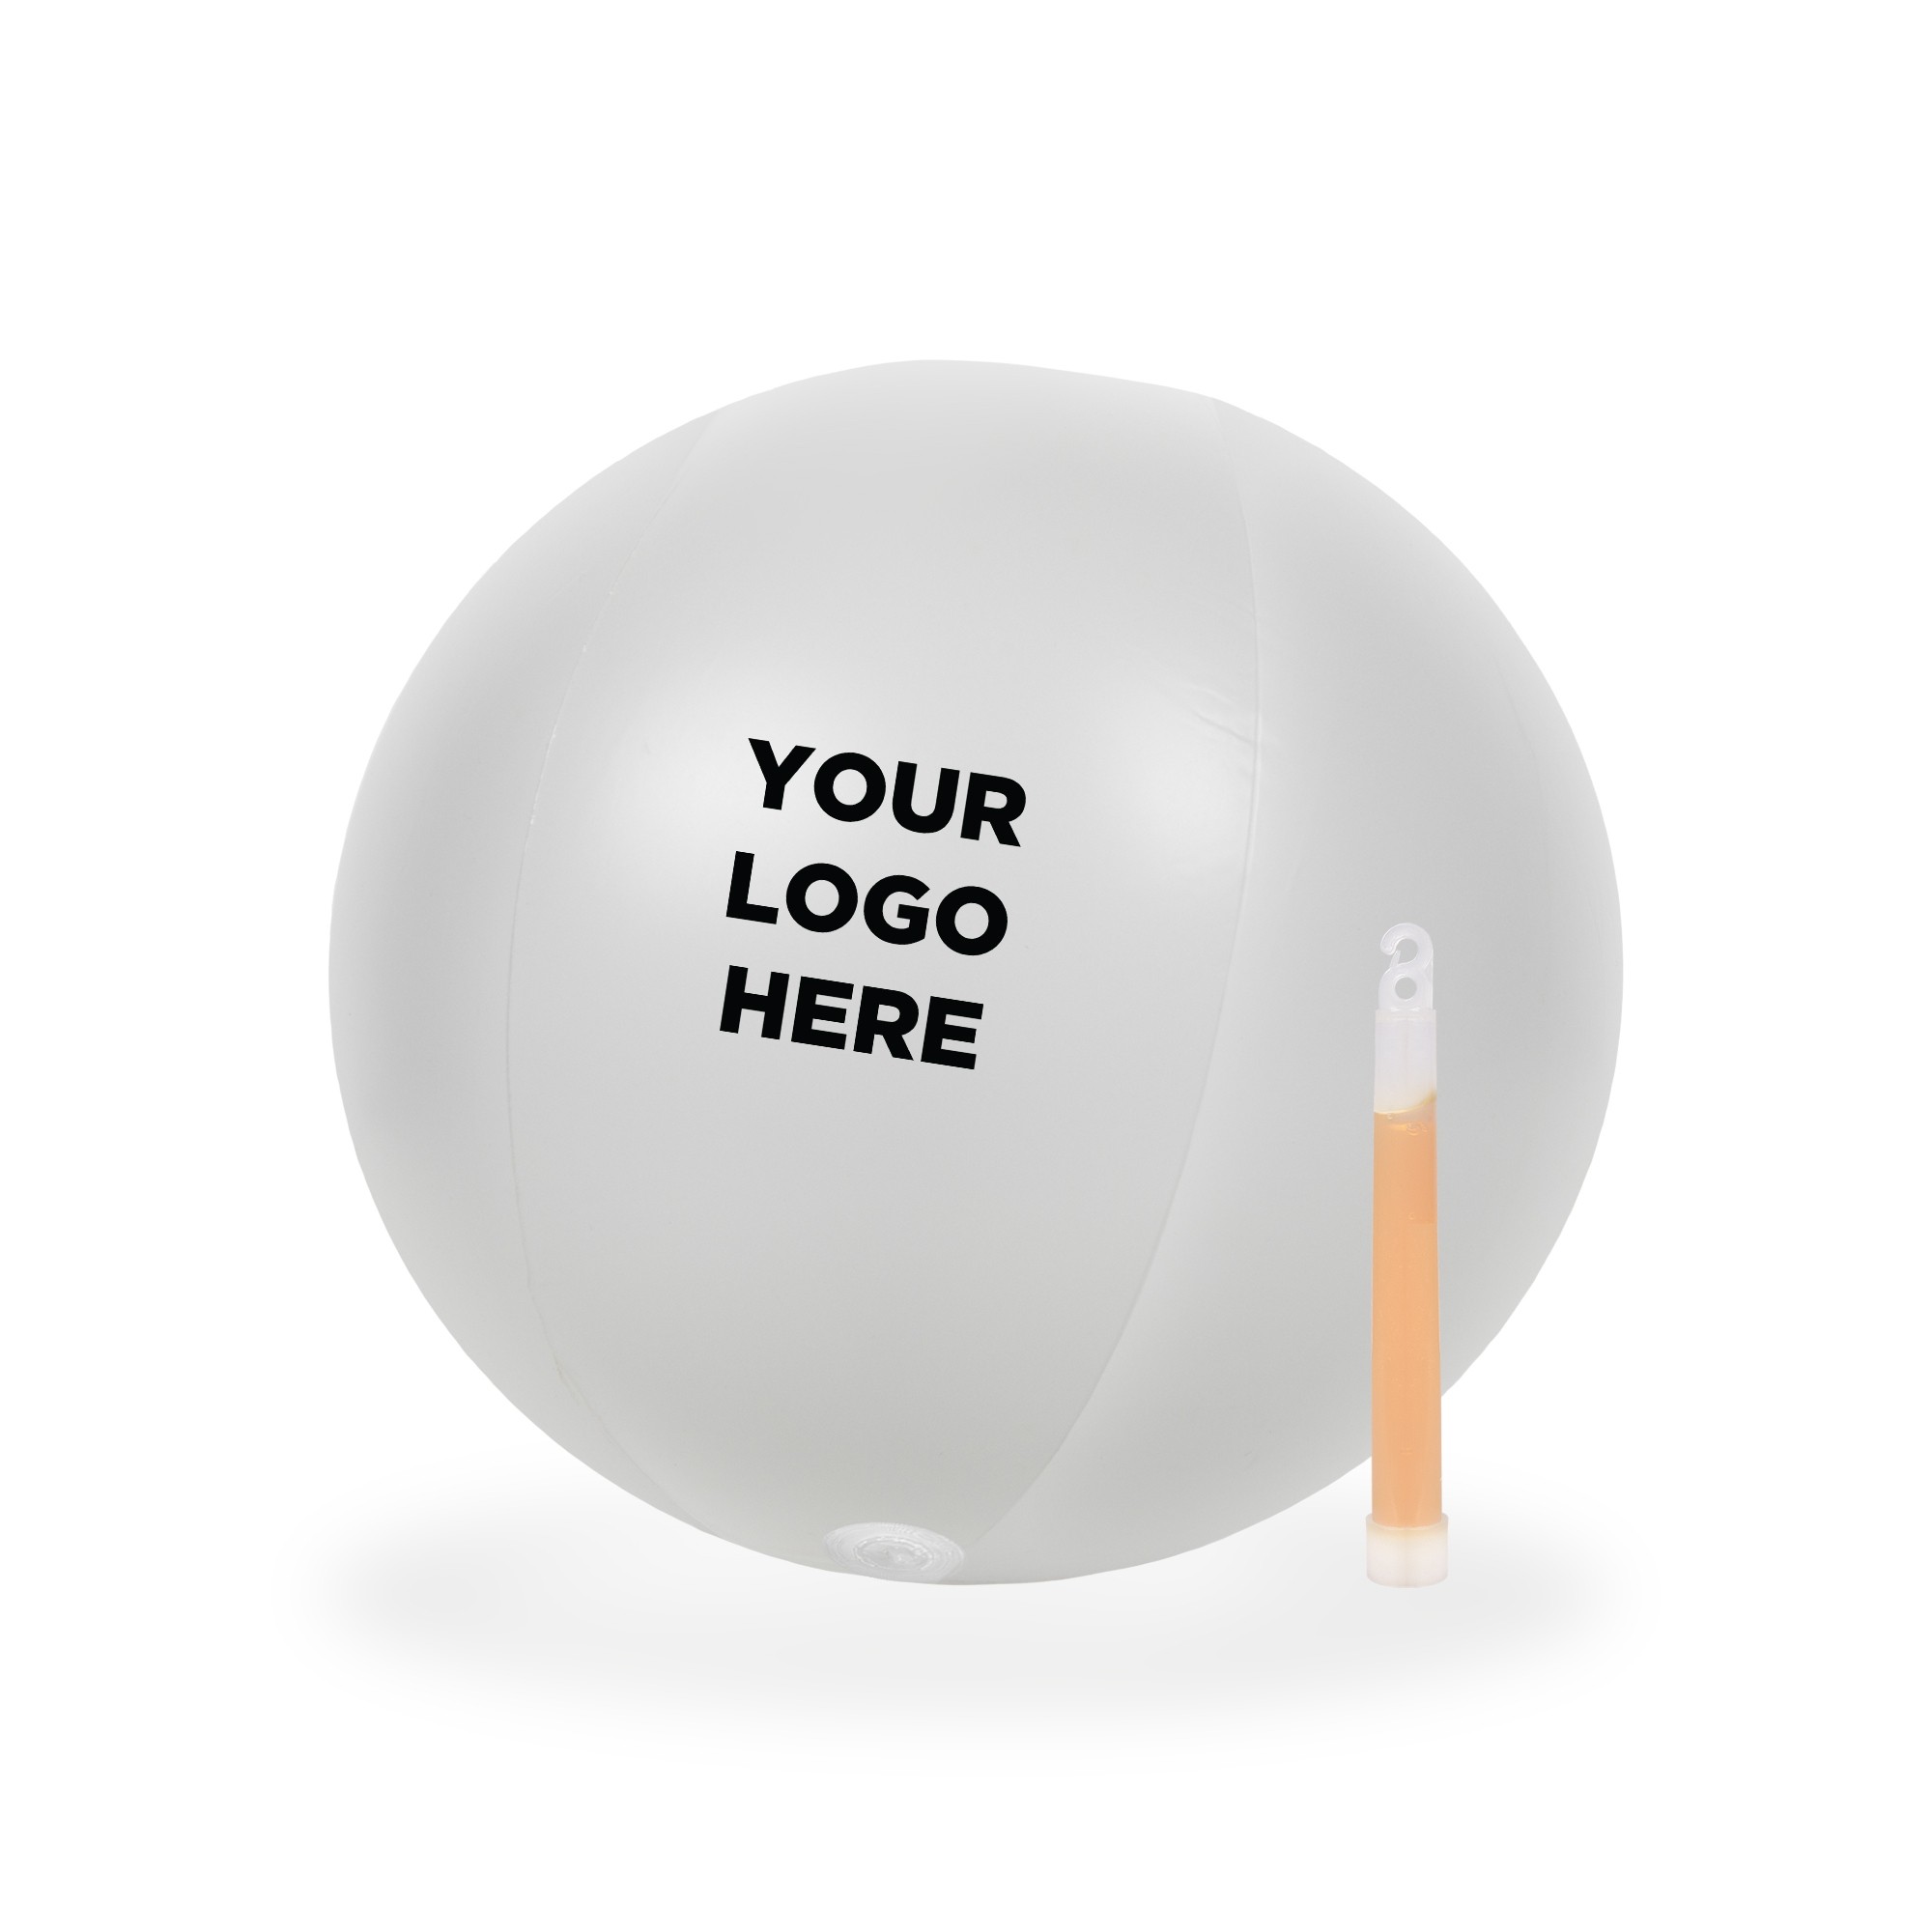 12 Inch Inflatable Beach Balls with 1 - 6 Inch WHITE Glow Stick